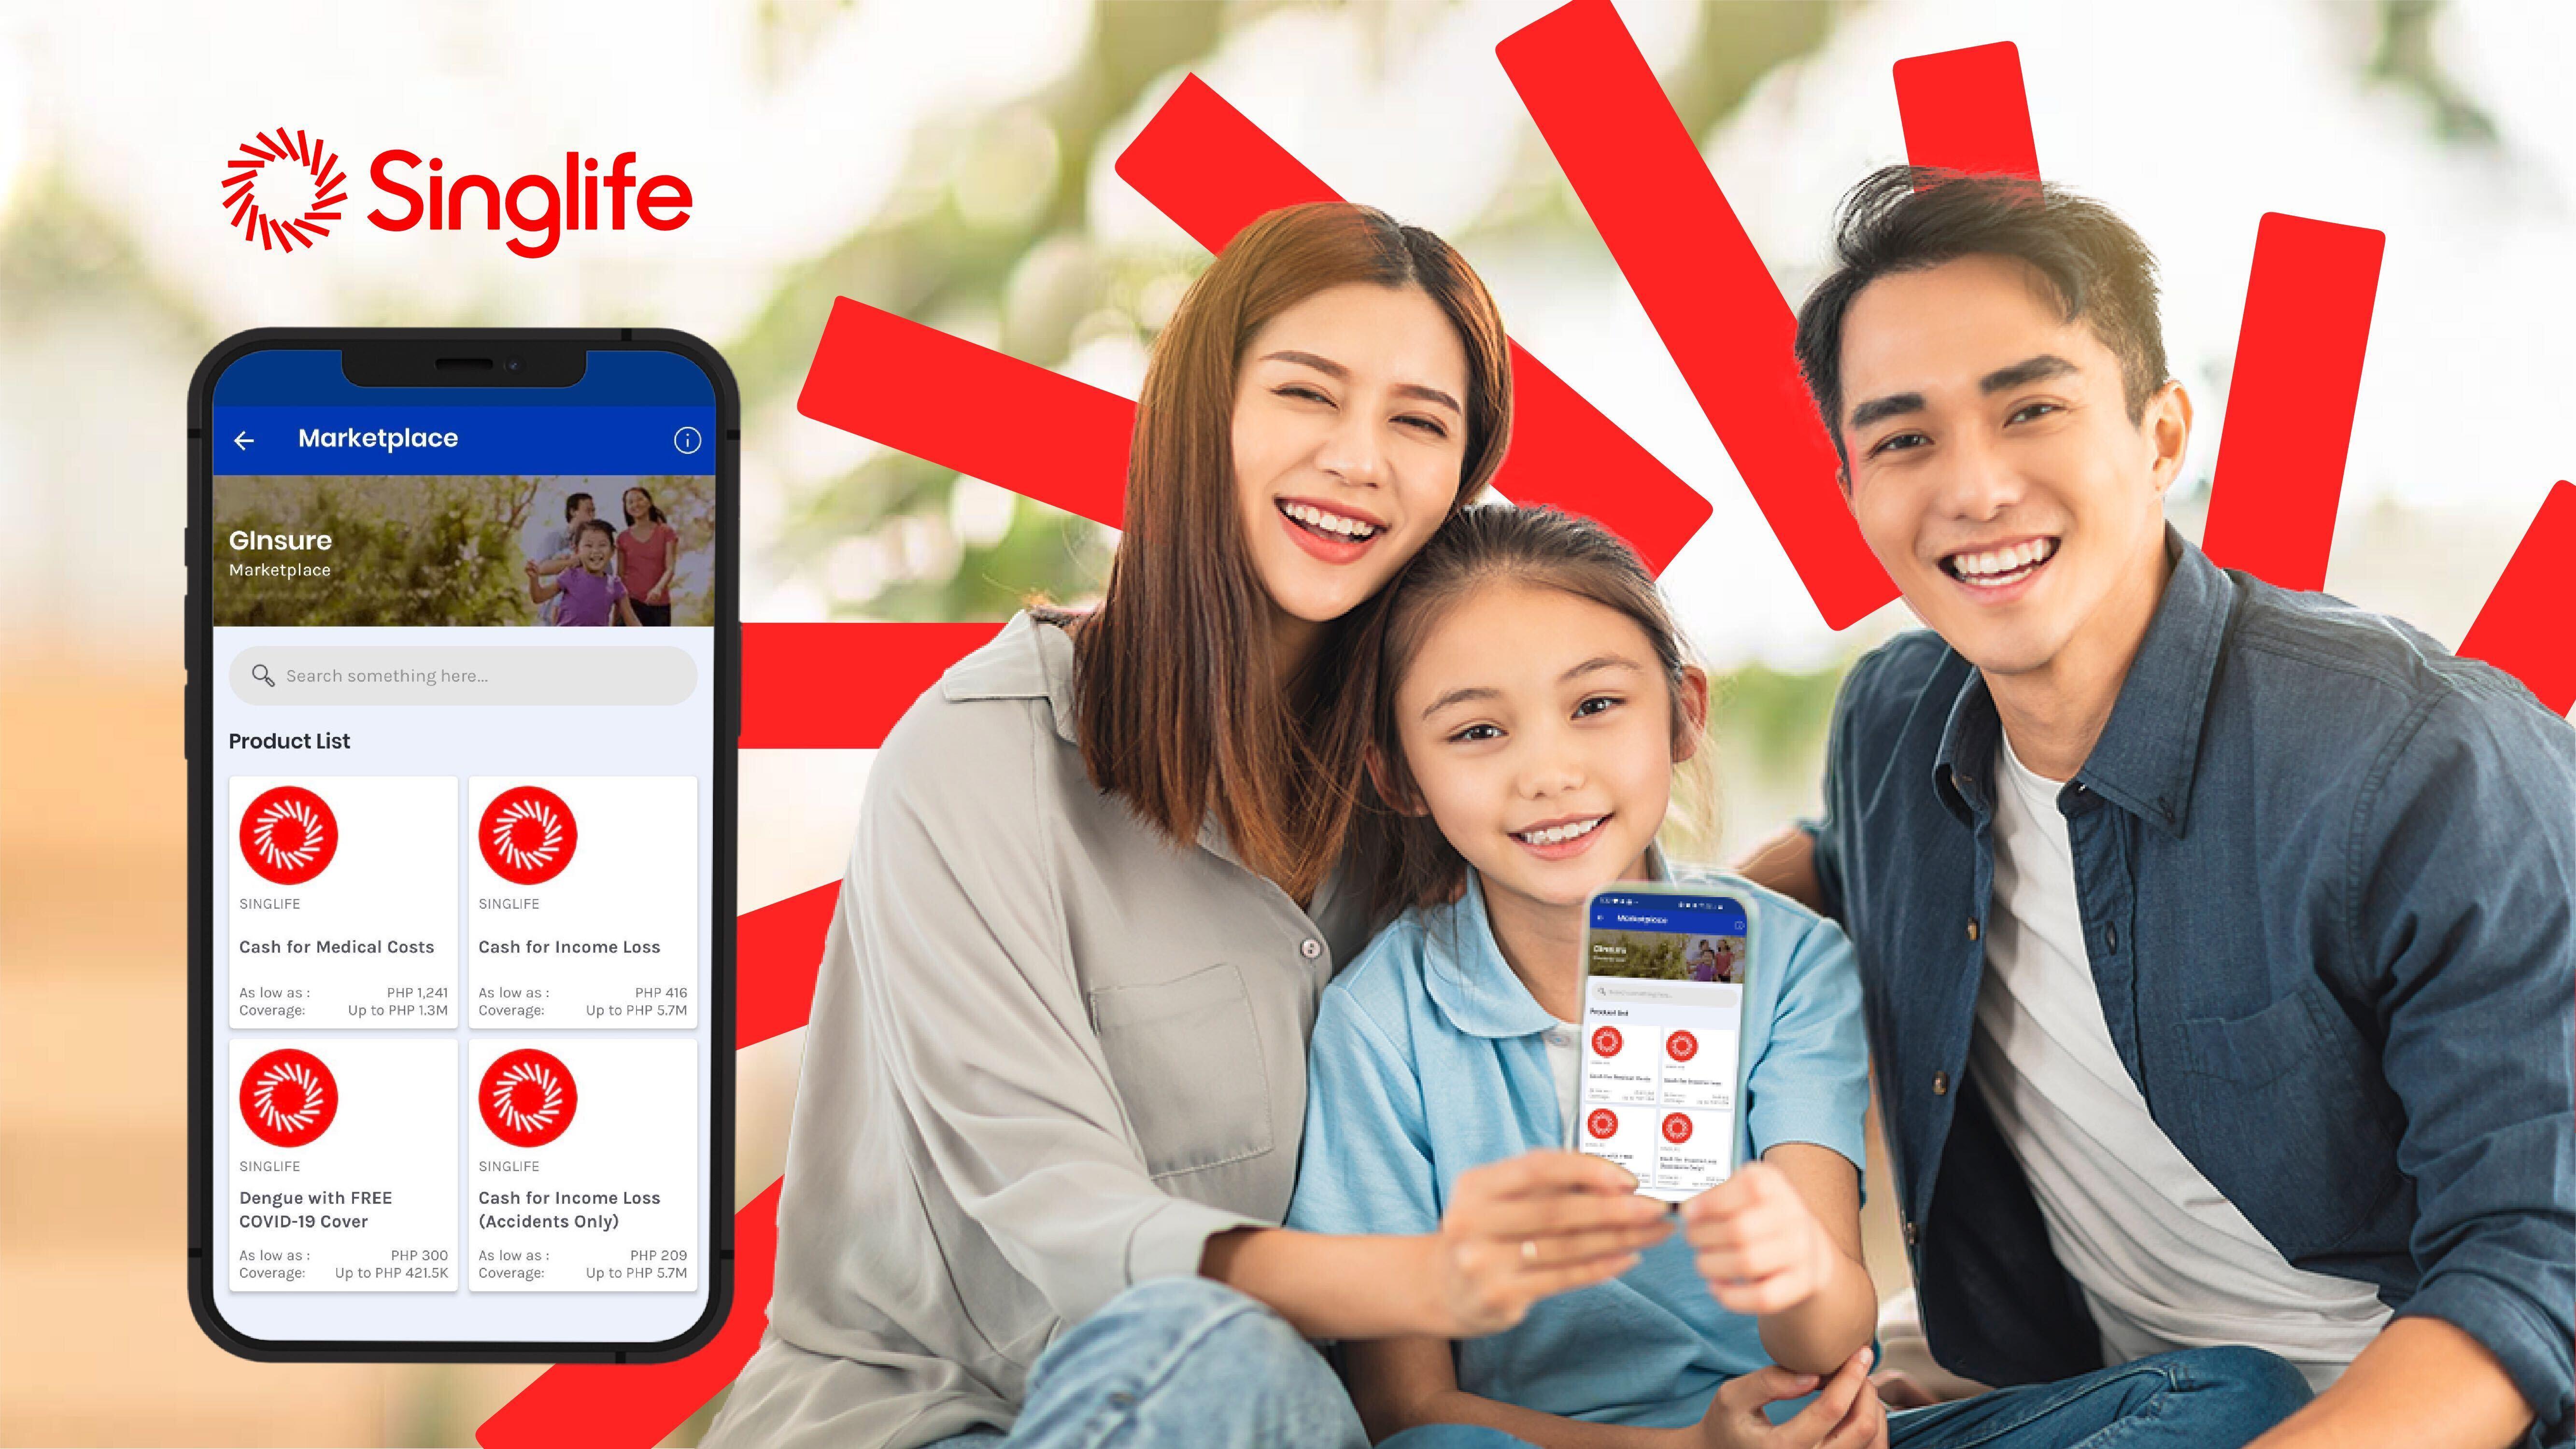 Singlife Philippines delivers on its promises: meaningful insurance that fits your budget.